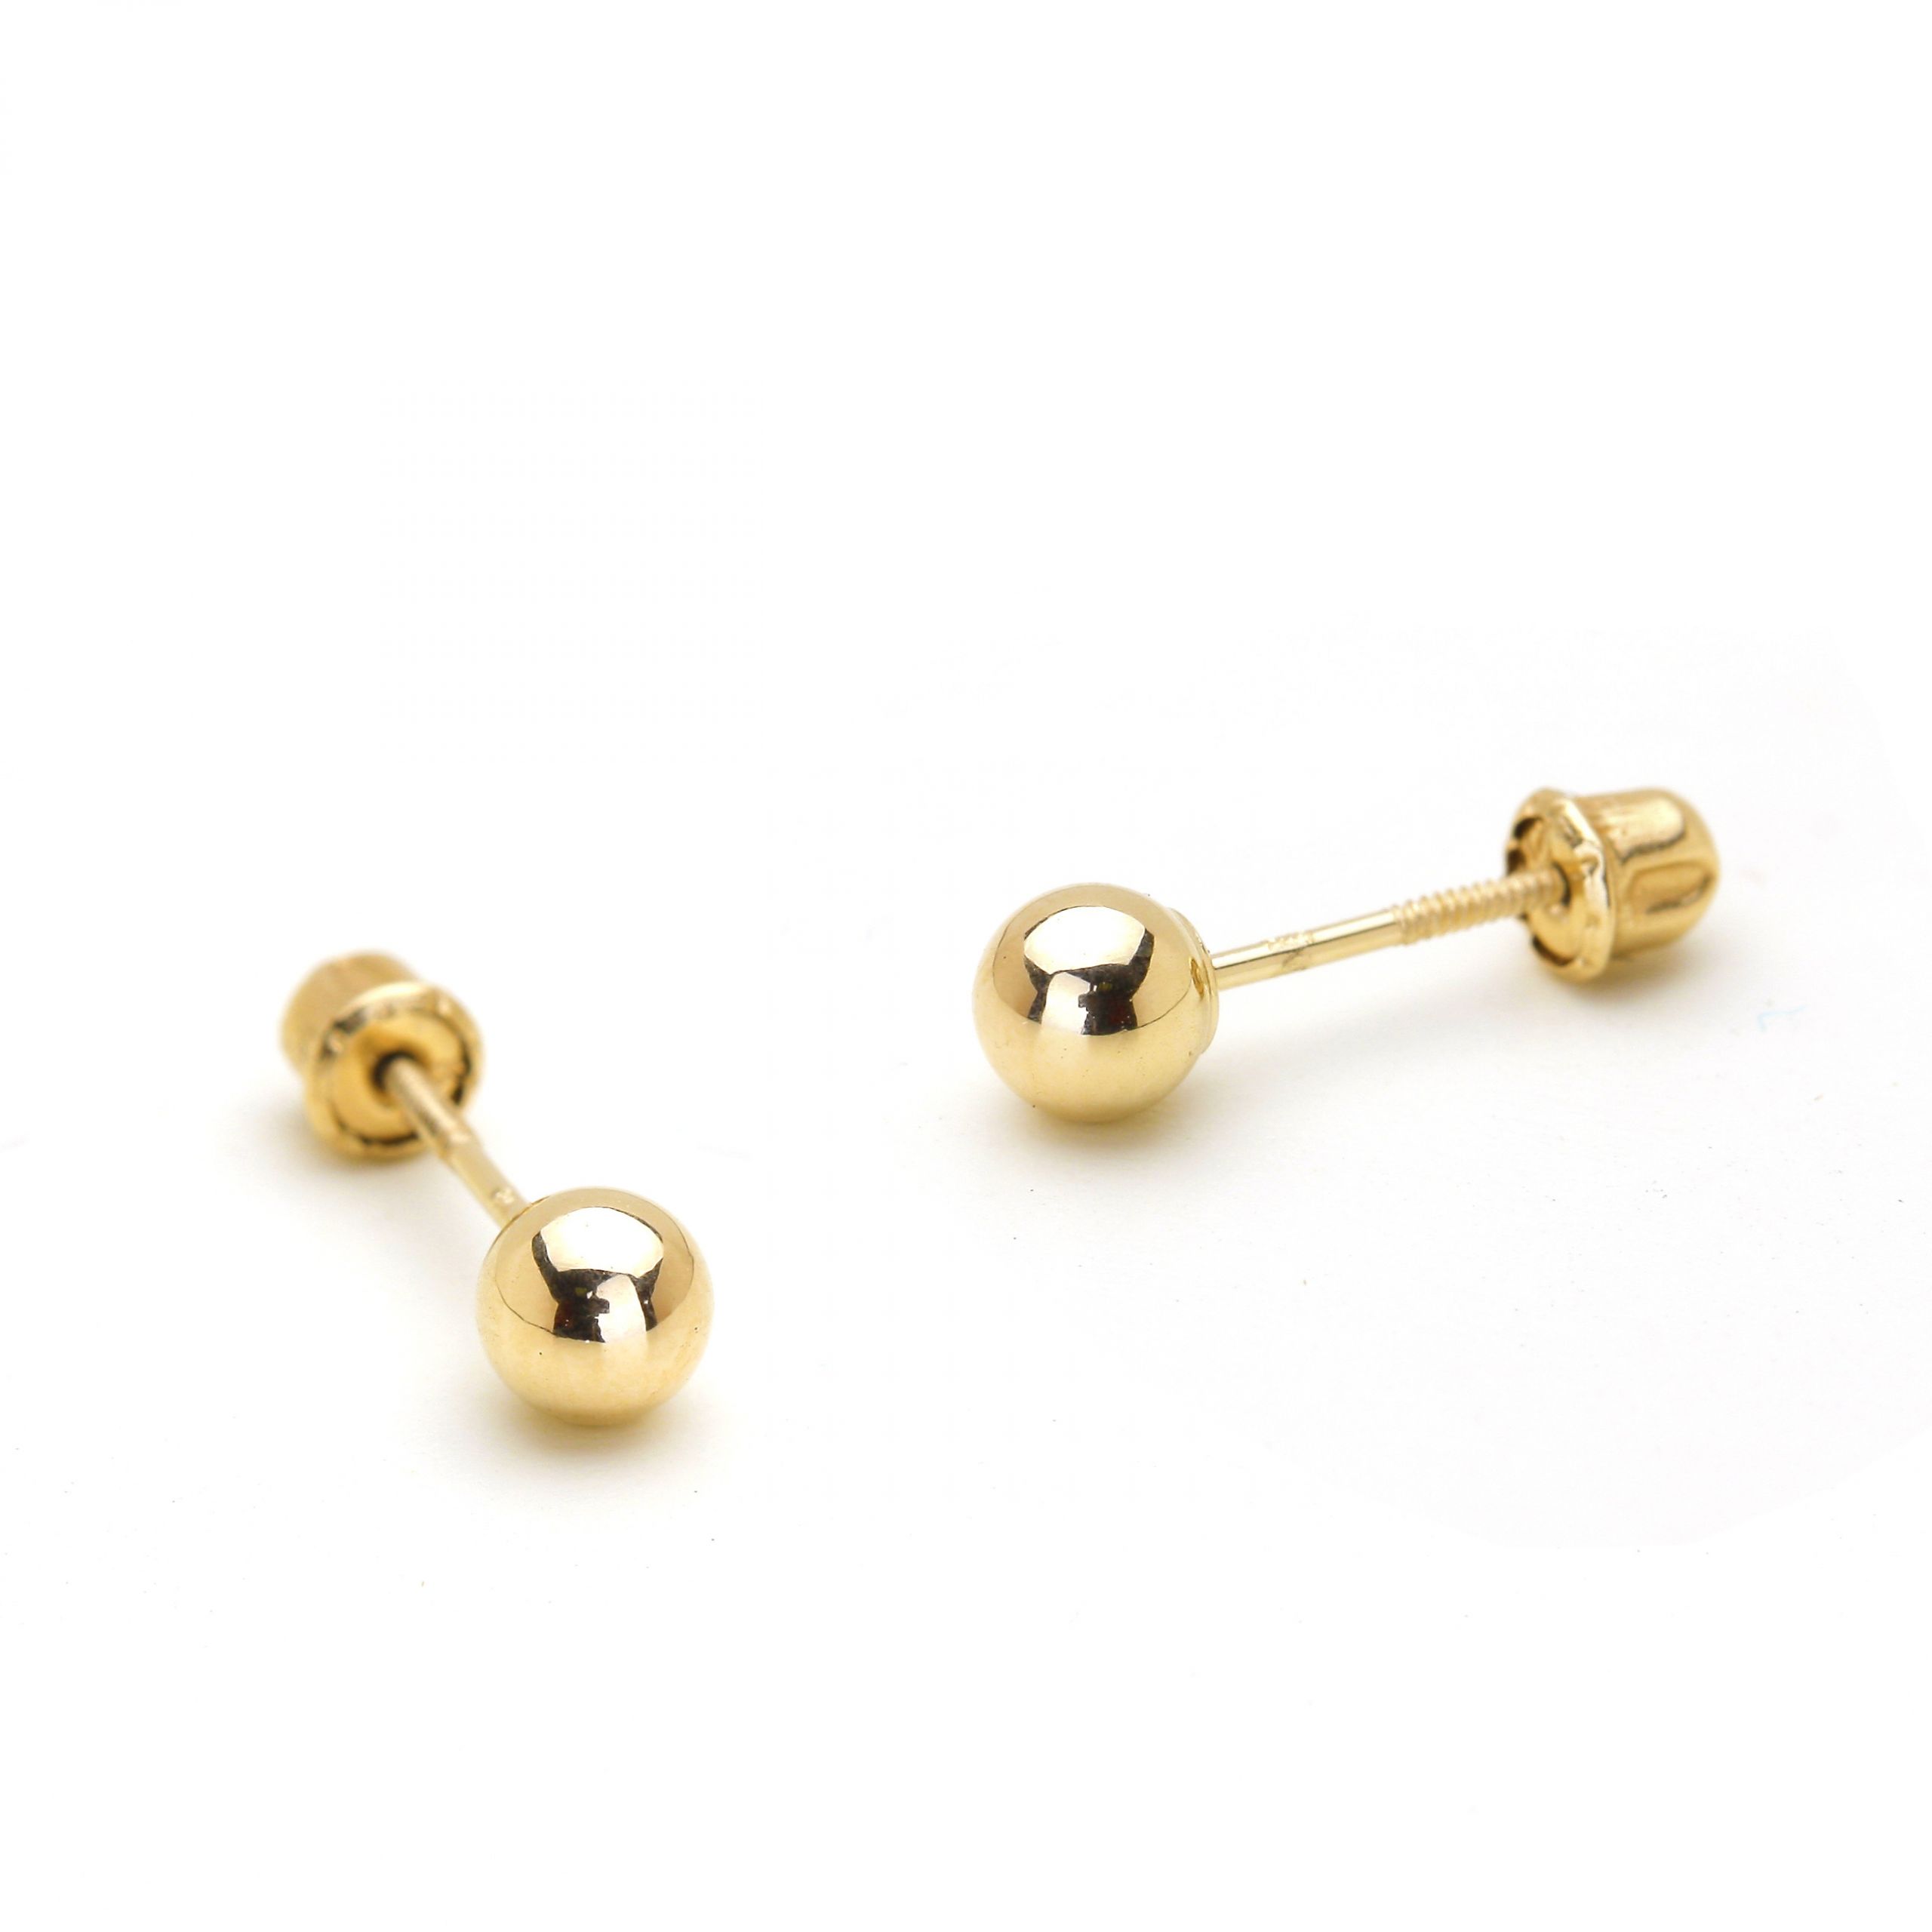 Baby Earrings Gold
 Lovearing 14k Yellow Gold 4mm Plain Hollow Gold Ball